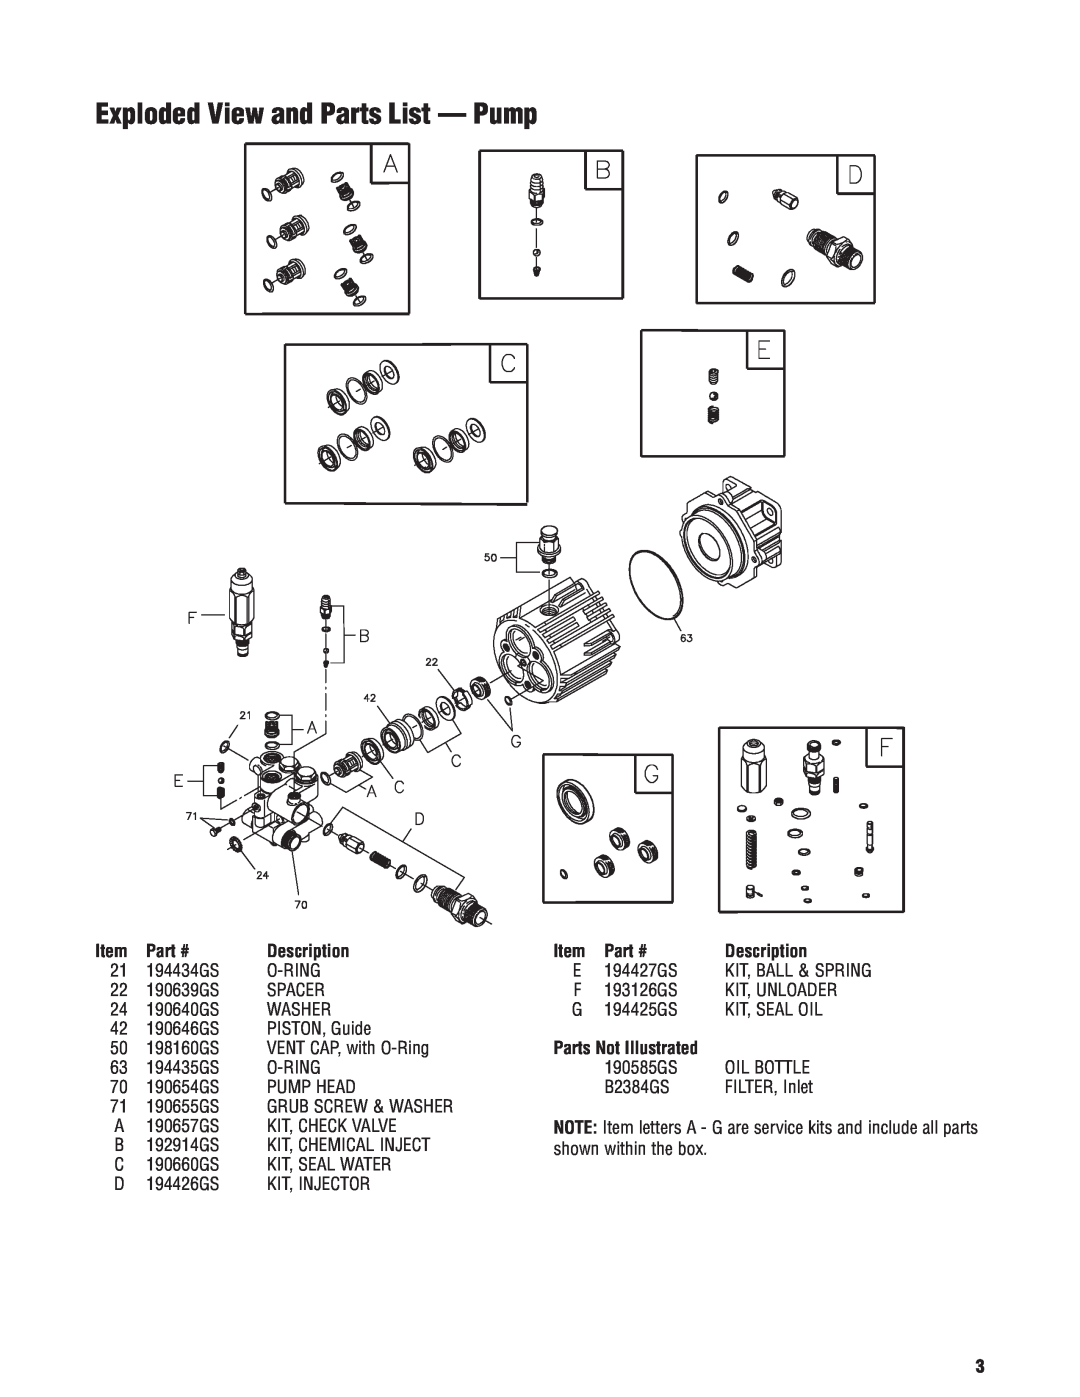 Briggs & Stratton 020274-1 manual Exploded View and Parts List - Pump, Parts Not Illustrated, Description 